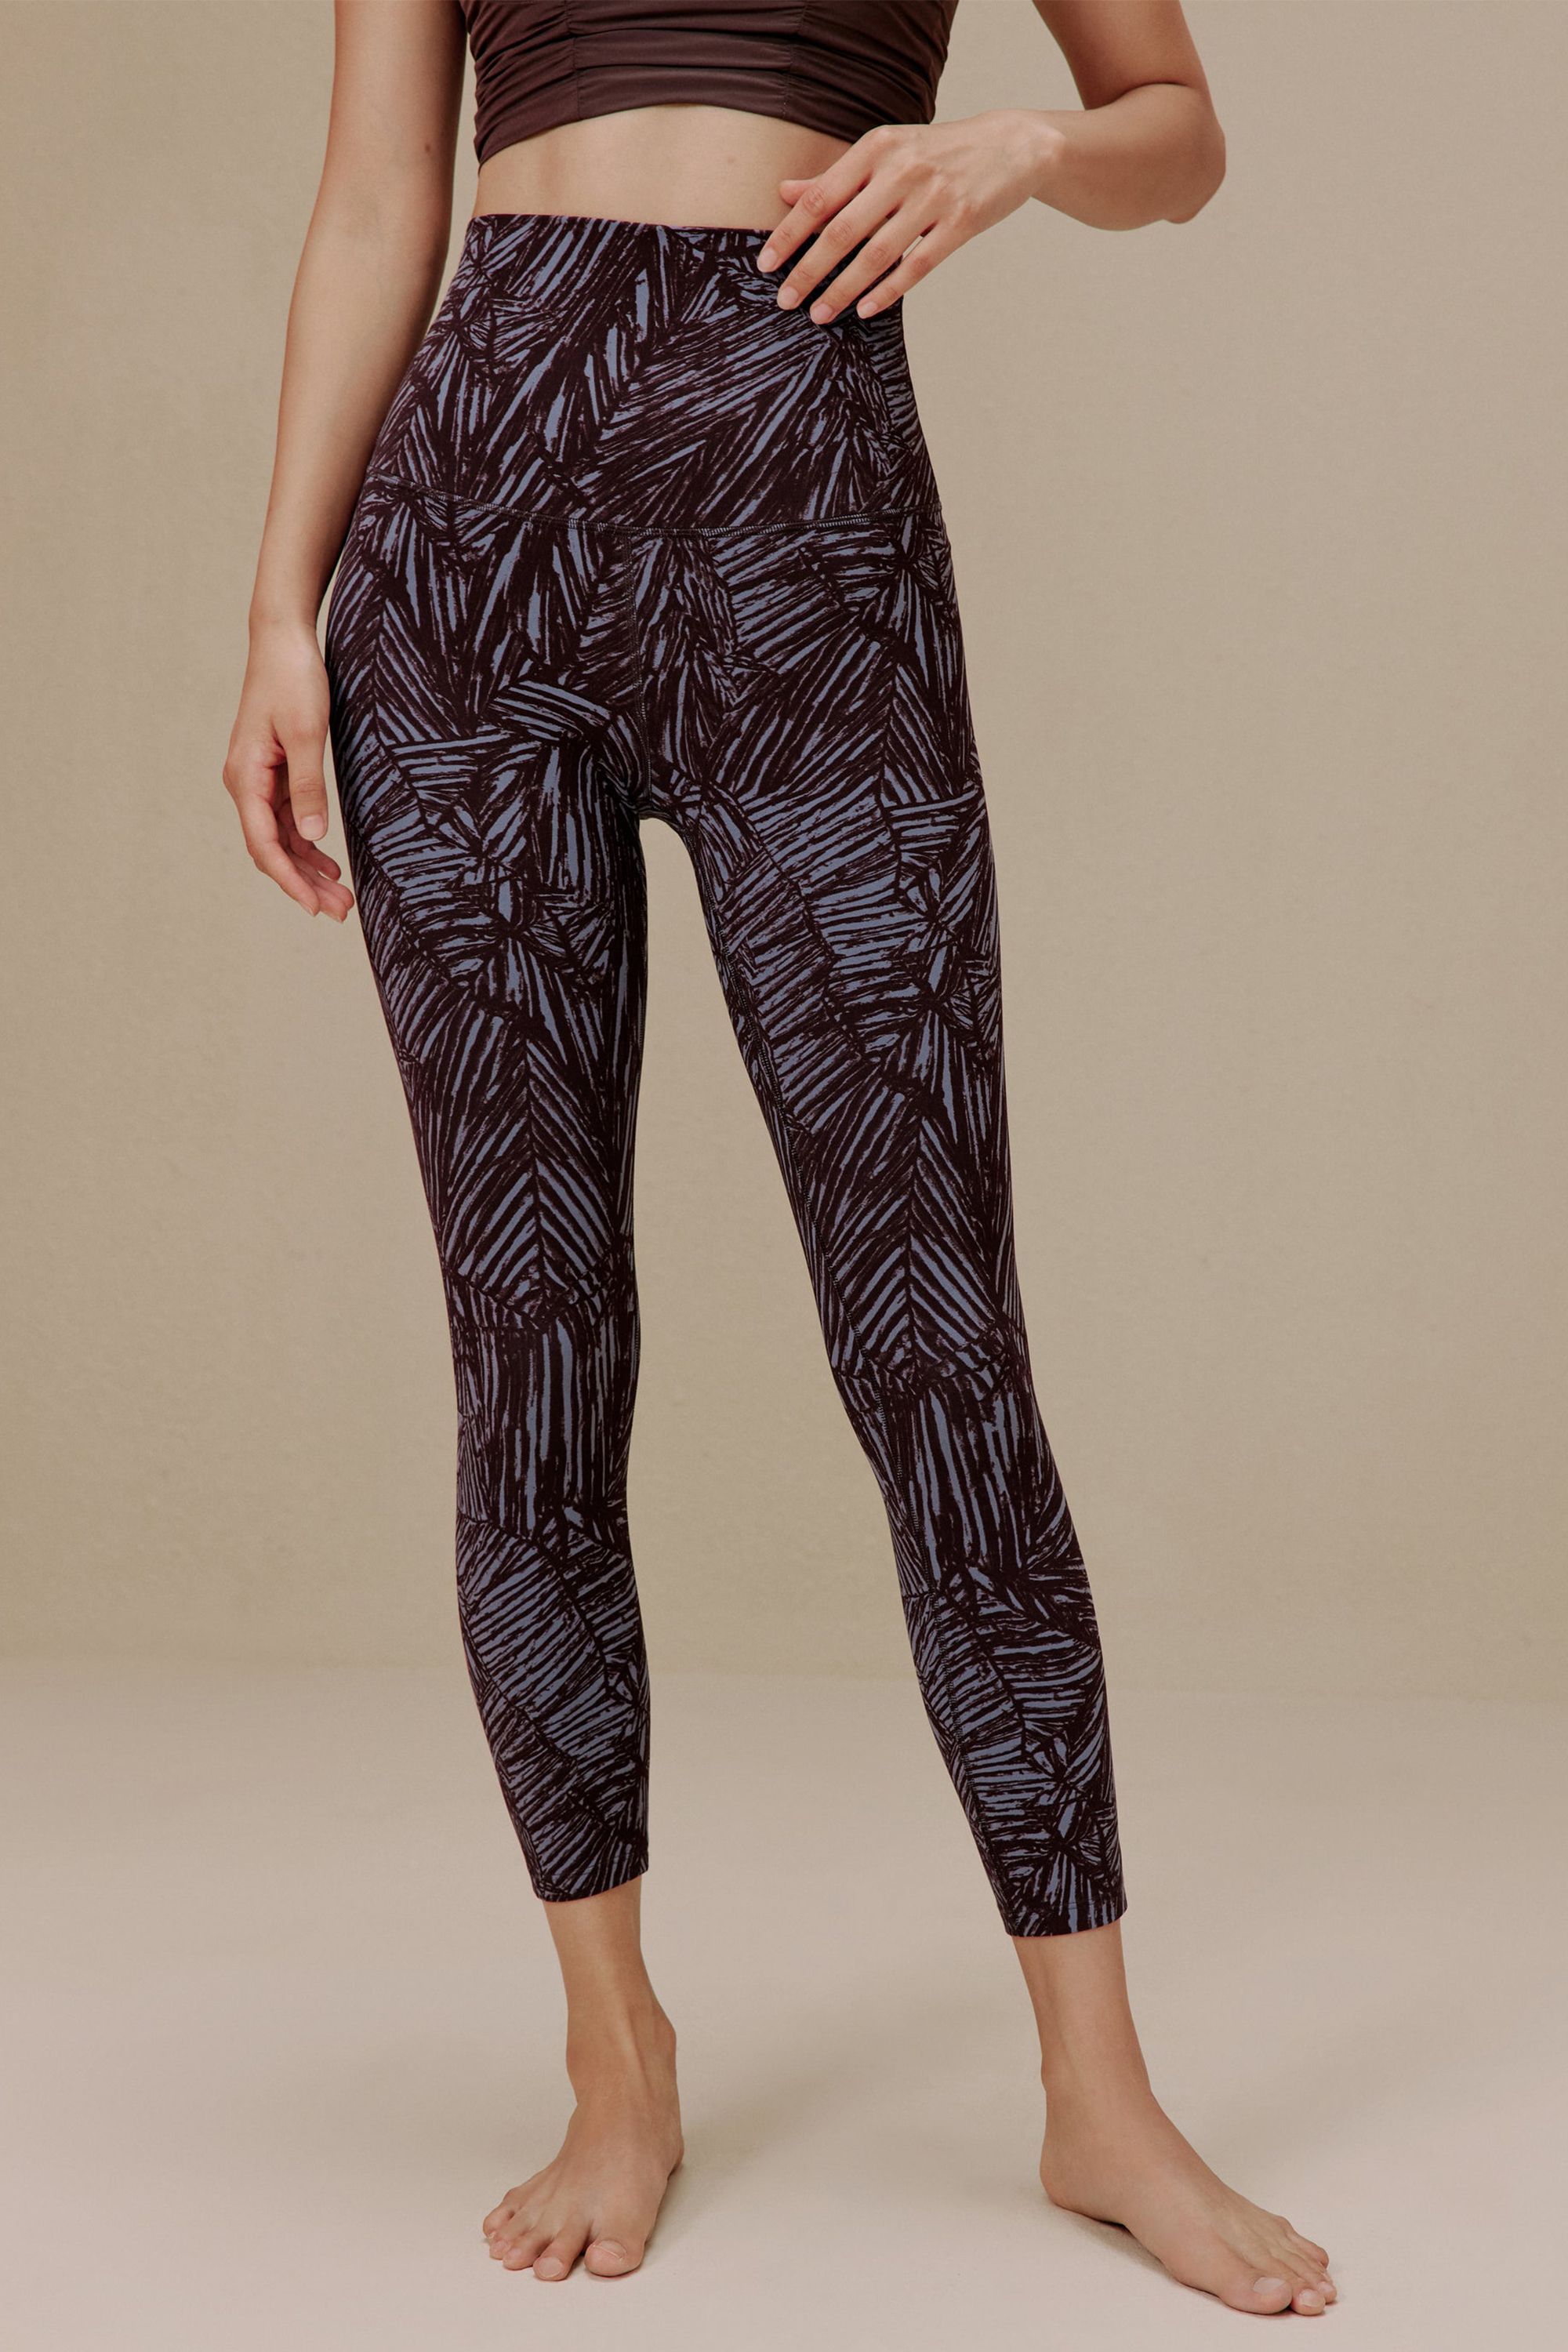 The Alo Yoga Airbrush Leggings Are Travel Writer Approved